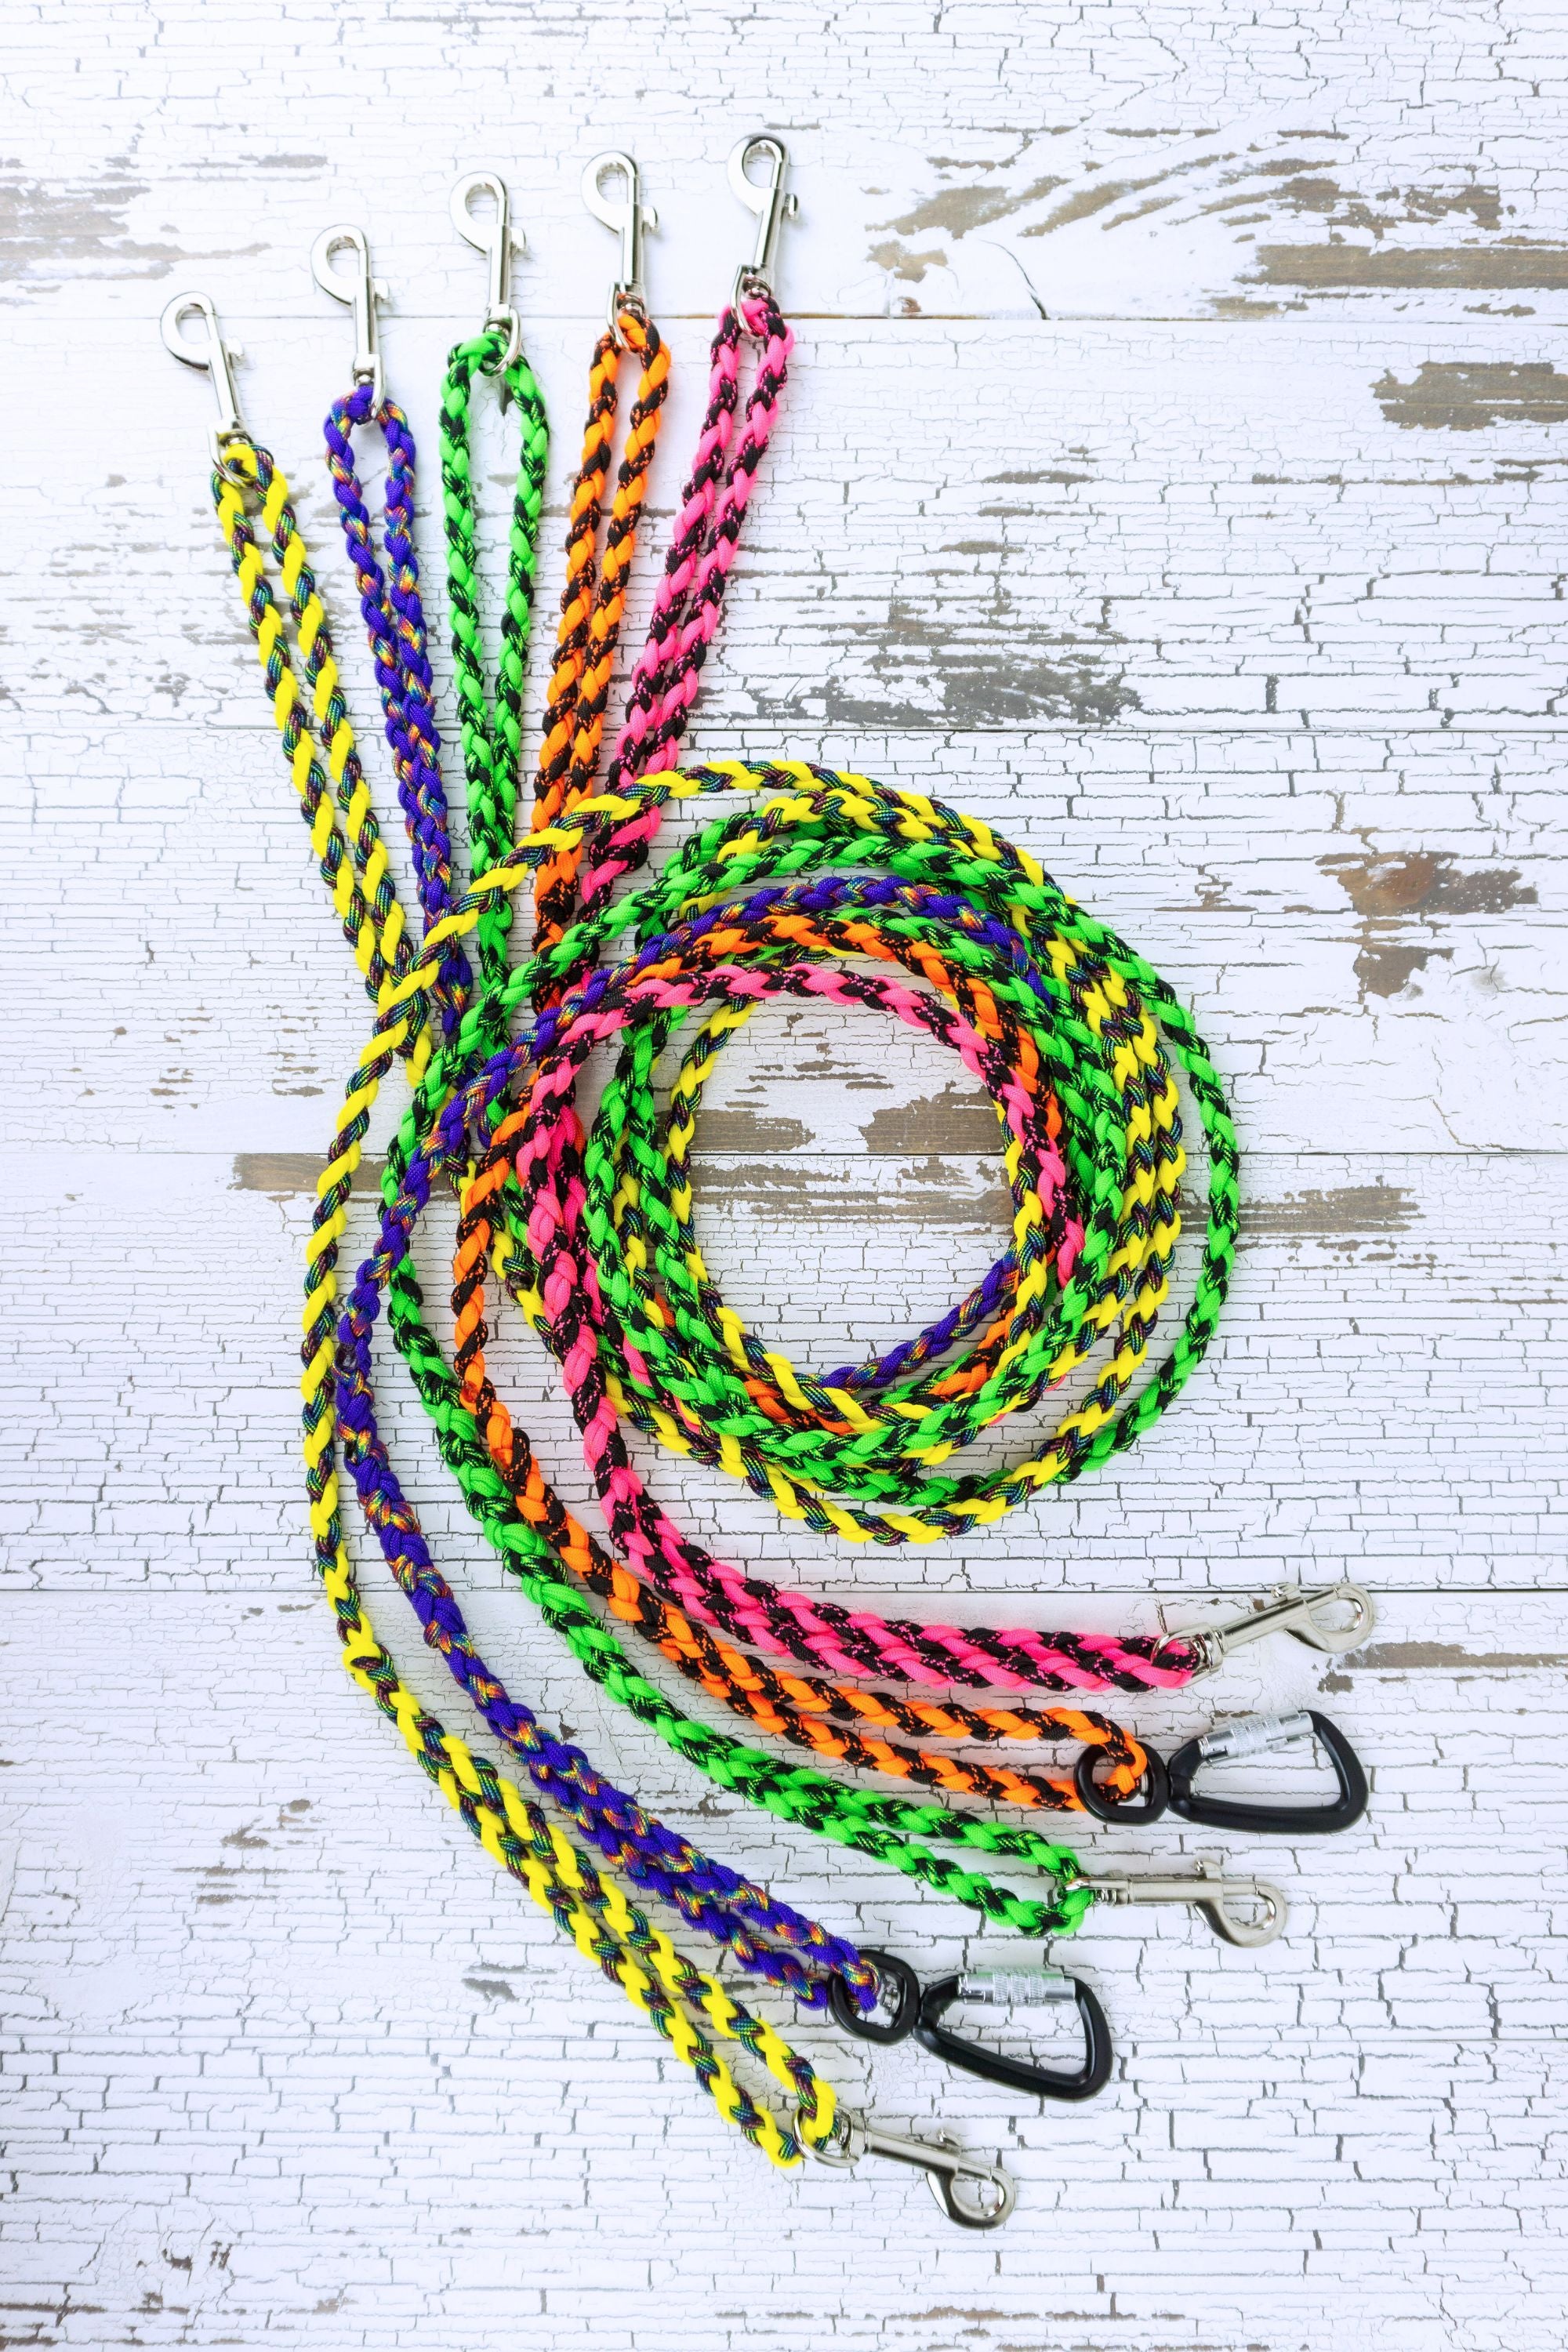 Five different paracord leashes in the two color options of neon yellow and rainbow, purple and rainbow, neon green and black, neon orange and black, and neon pink and black. Leashes are in a swirled flat lay, showing loop handles at each end and two styles of hardware.